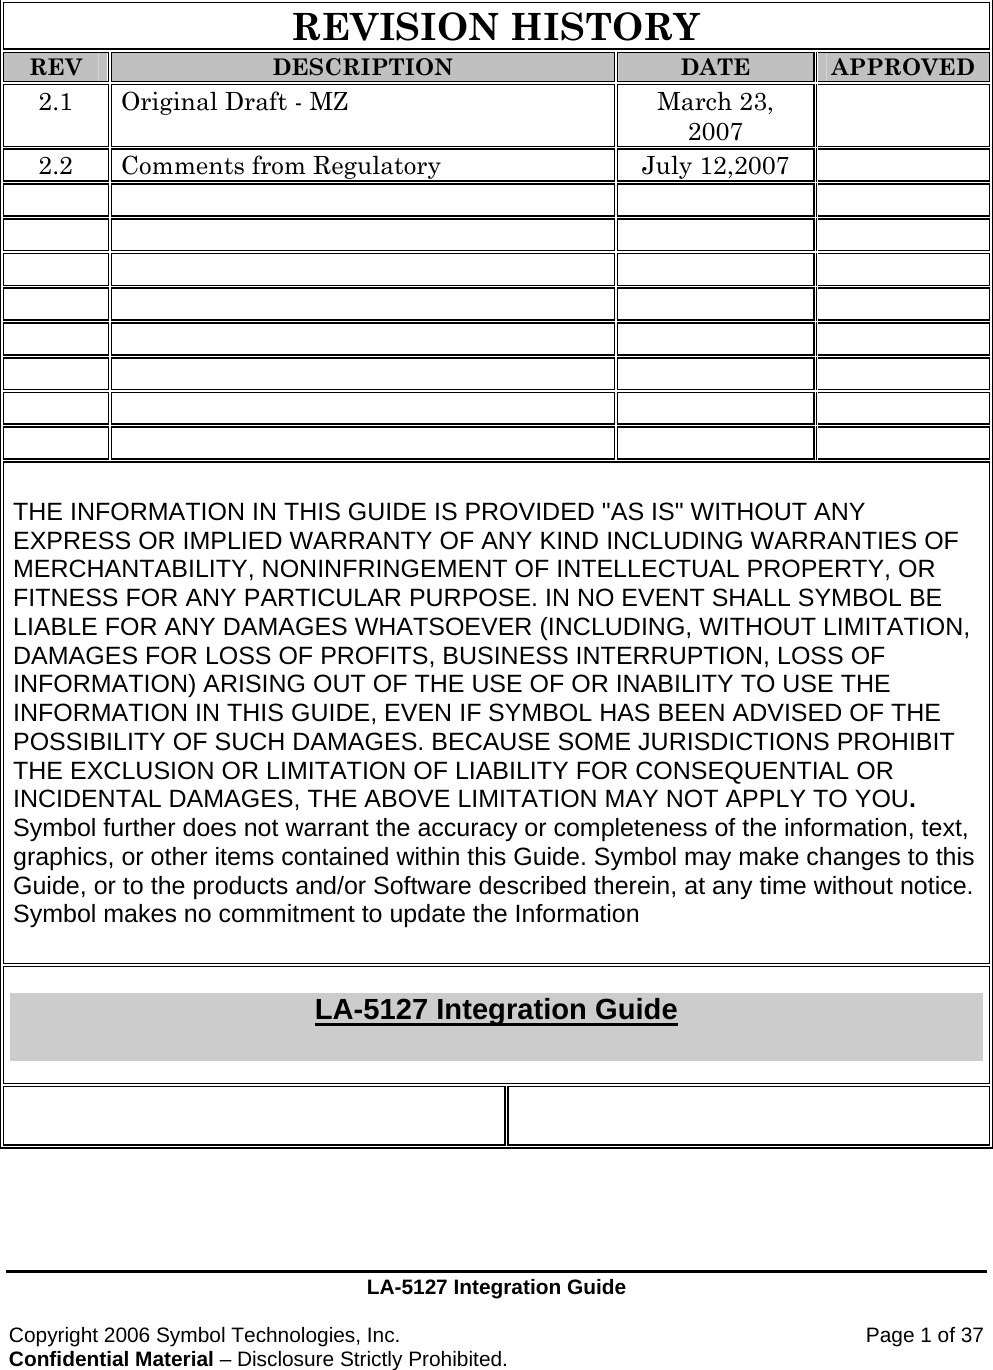 LA-5127 Integration Guide  Copyright 2006 Symbol Technologies, Inc.    Page 1 of 37 Confidential Material – Disclosure Strictly Prohibited.   REVISION HISTORY REV DESCRIPTION DATE APPROVED 2.1  Original Draft - MZ  March 23, 2007  2.2  Comments from Regulatory  July 12,2007                                                   THE INFORMATION IN THIS GUIDE IS PROVIDED &quot;AS IS&quot; WITHOUT ANY EXPRESS OR IMPLIED WARRANTY OF ANY KIND INCLUDING WARRANTIES OF MERCHANTABILITY, NONINFRINGEMENT OF INTELLECTUAL PROPERTY, OR FITNESS FOR ANY PARTICULAR PURPOSE. IN NO EVENT SHALL SYMBOL BE LIABLE FOR ANY DAMAGES WHATSOEVER (INCLUDING, WITHOUT LIMITATION, DAMAGES FOR LOSS OF PROFITS, BUSINESS INTERRUPTION, LOSS OF INFORMATION) ARISING OUT OF THE USE OF OR INABILITY TO USE THE INFORMATION IN THIS GUIDE, EVEN IF SYMBOL HAS BEEN ADVISED OF THE POSSIBILITY OF SUCH DAMAGES. BECAUSE SOME JURISDICTIONS PROHIBIT THE EXCLUSION OR LIMITATION OF LIABILITY FOR CONSEQUENTIAL OR INCIDENTAL DAMAGES, THE ABOVE LIMITATION MAY NOT APPLY TO YOU. Symbol further does not warrant the accuracy or completeness of the information, text, graphics, or other items contained within this Guide. Symbol may make changes to this Guide, or to the products and/or Software described therein, at any time without notice. Symbol makes no commitment to update the Information   LA-5127 Integration Guide    